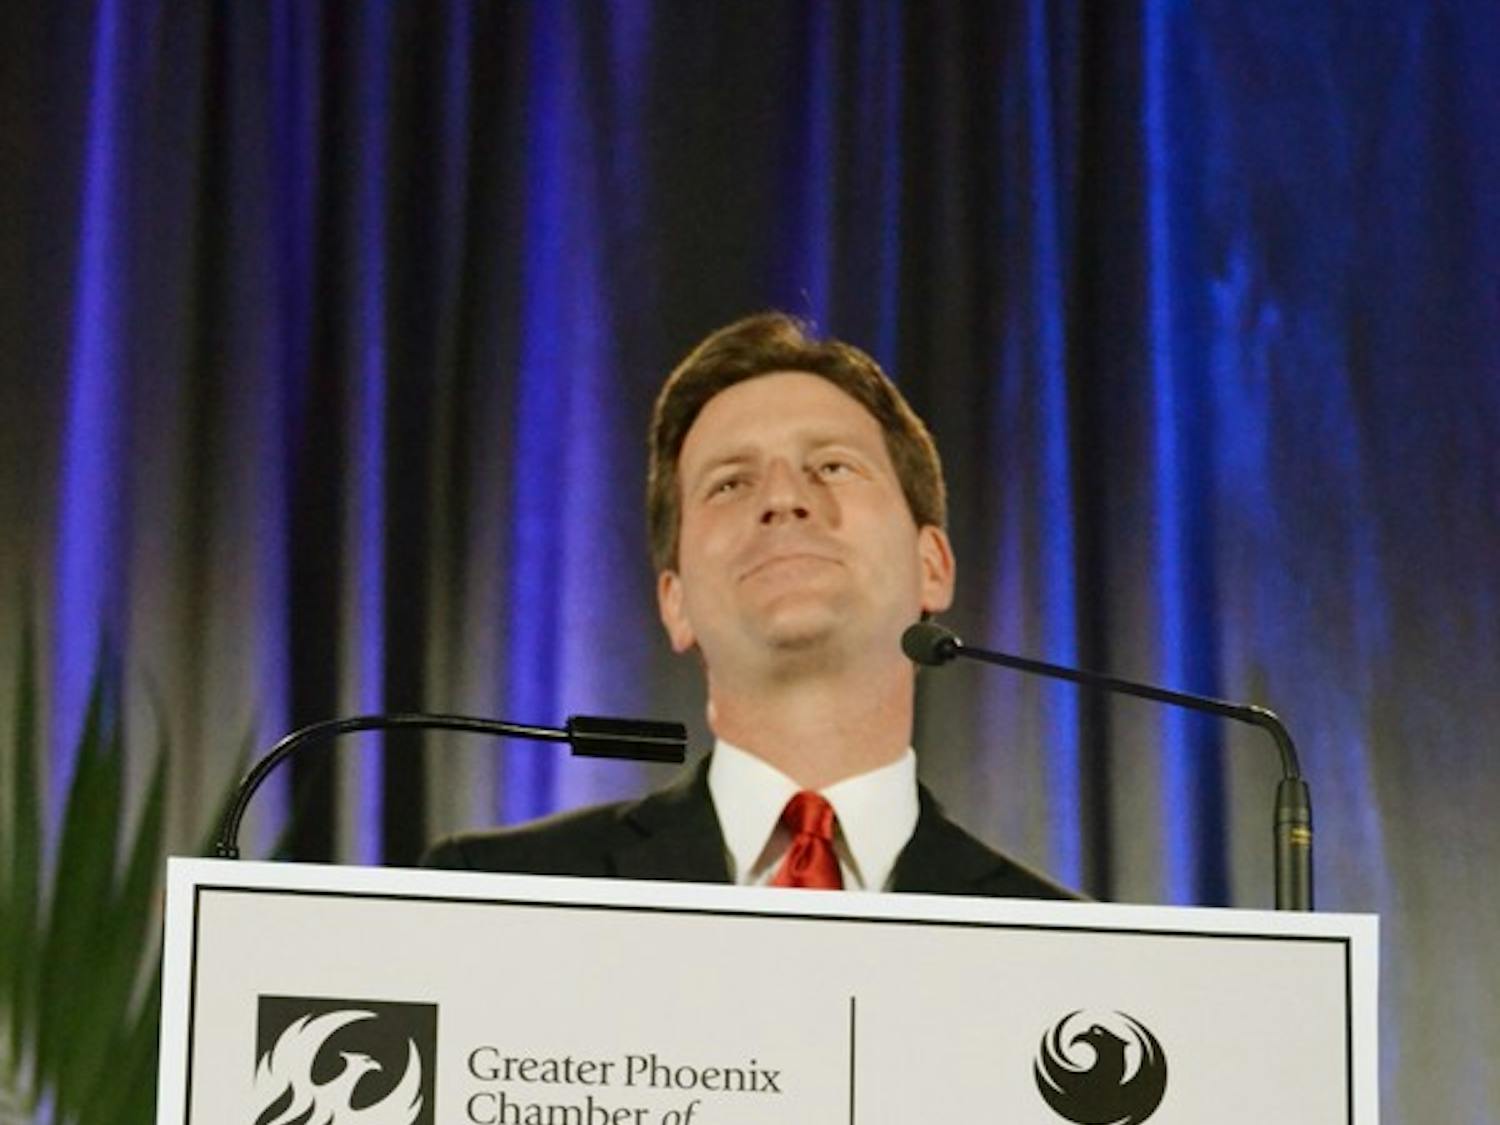 Phoenix Mayor Greg Stanton delivered his State of the City address at the Phoenix Convention Center on April 11, 2012. (Photo by Mackenzie McCreary)